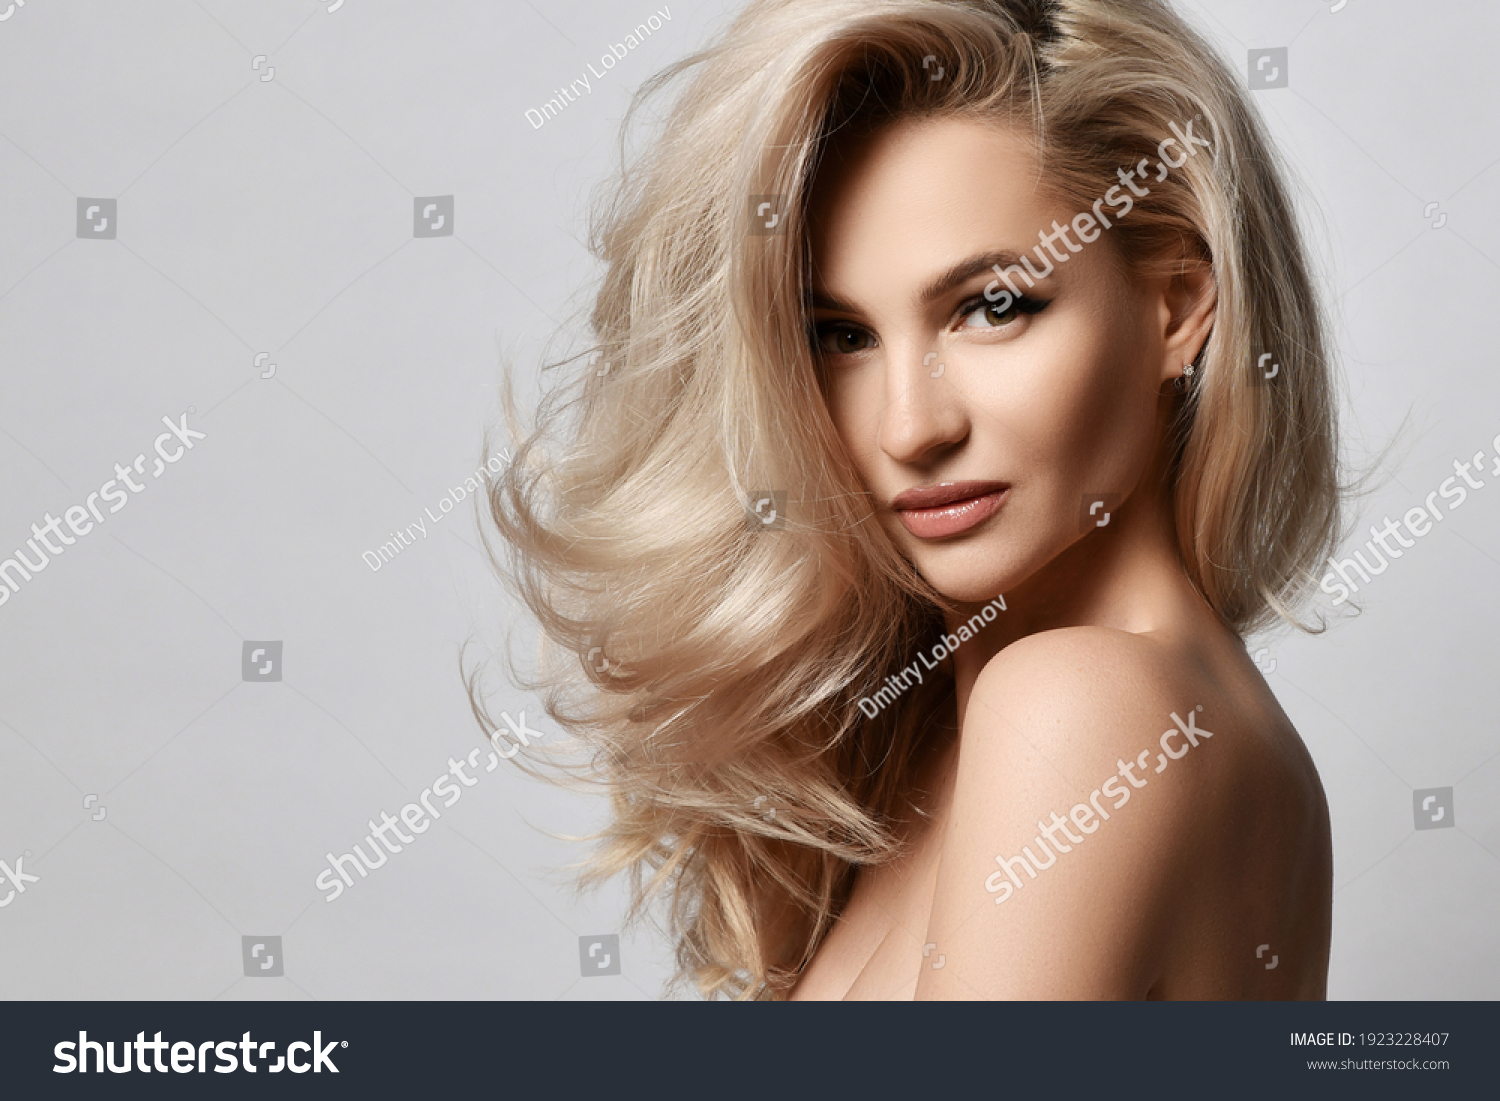 Healthy skin beautiful woman beauty skin and hair portrait natural make up. Blonde woman face clean healthy skin natural female spa glamour portrait on grey background #1923228407